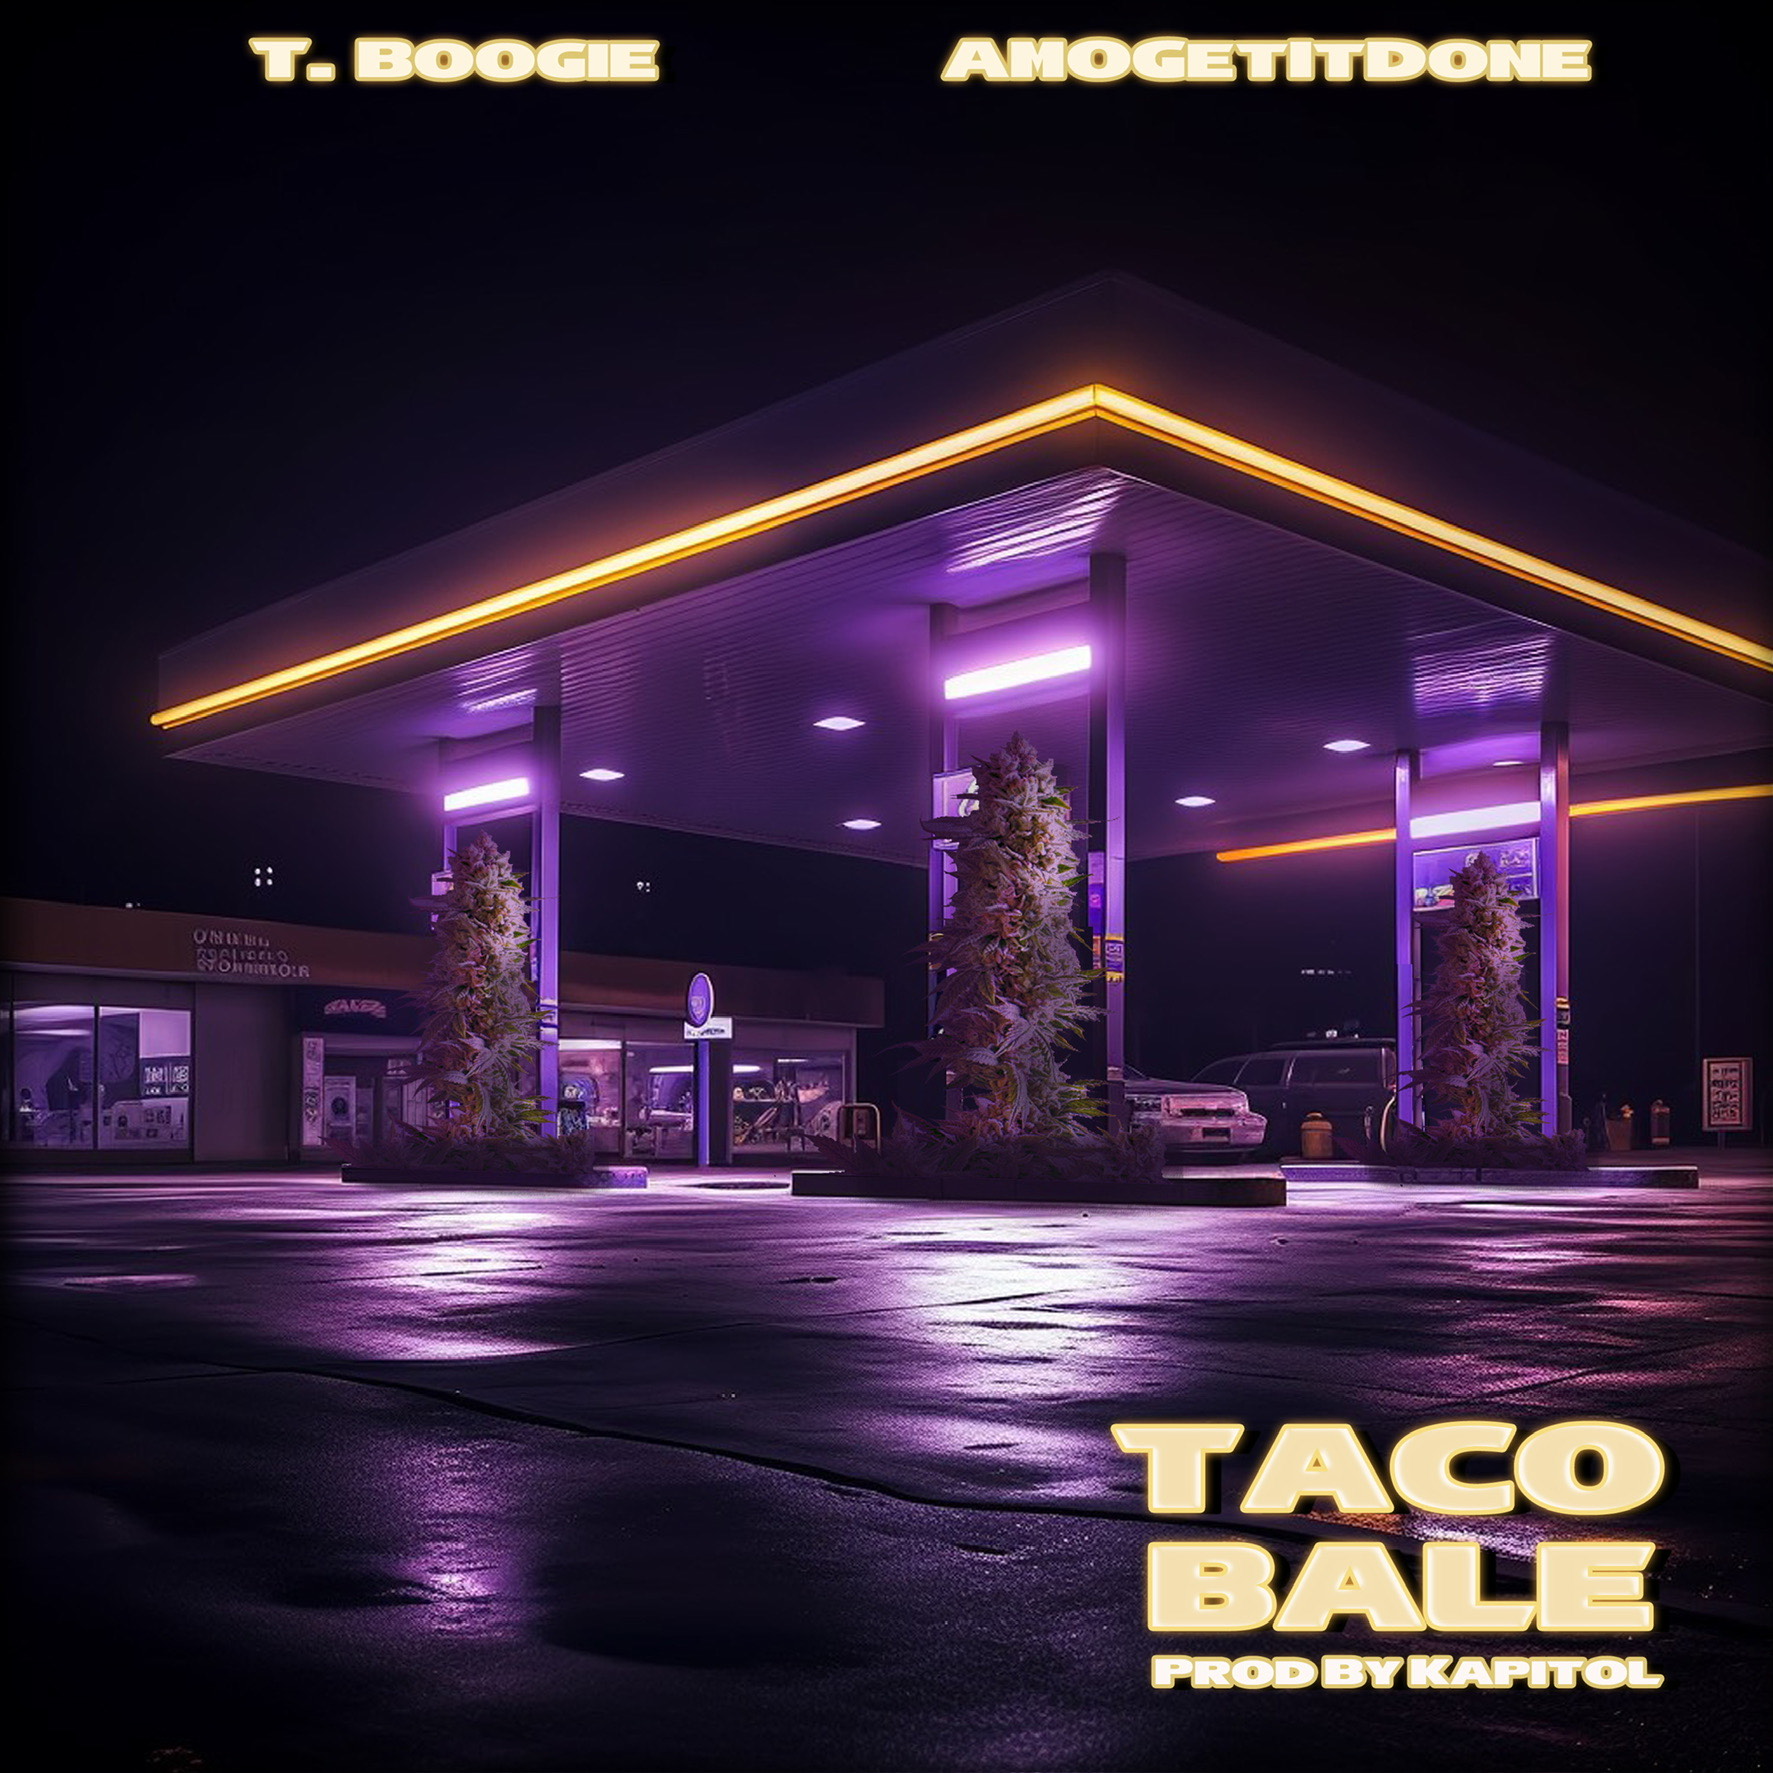 T. Boogie (@TBOOGIEfromDC) F/ AMOGetItDone (@AMOGetItDone) – “Taco Bale” | Prod by @weneedkapitol